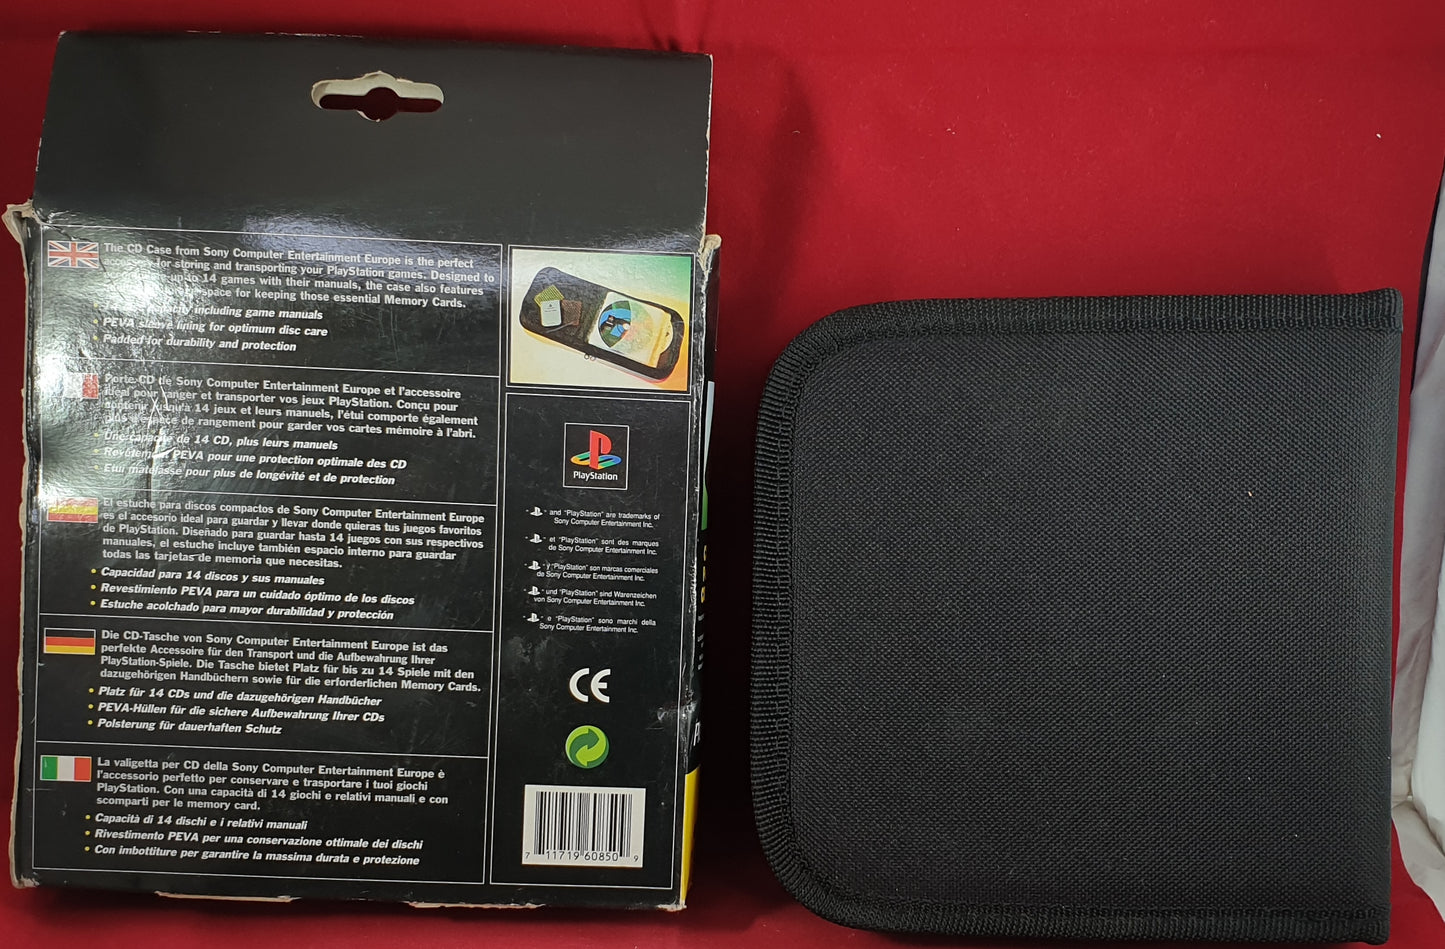 Official Sony Playstation CD Carry Case Accessory